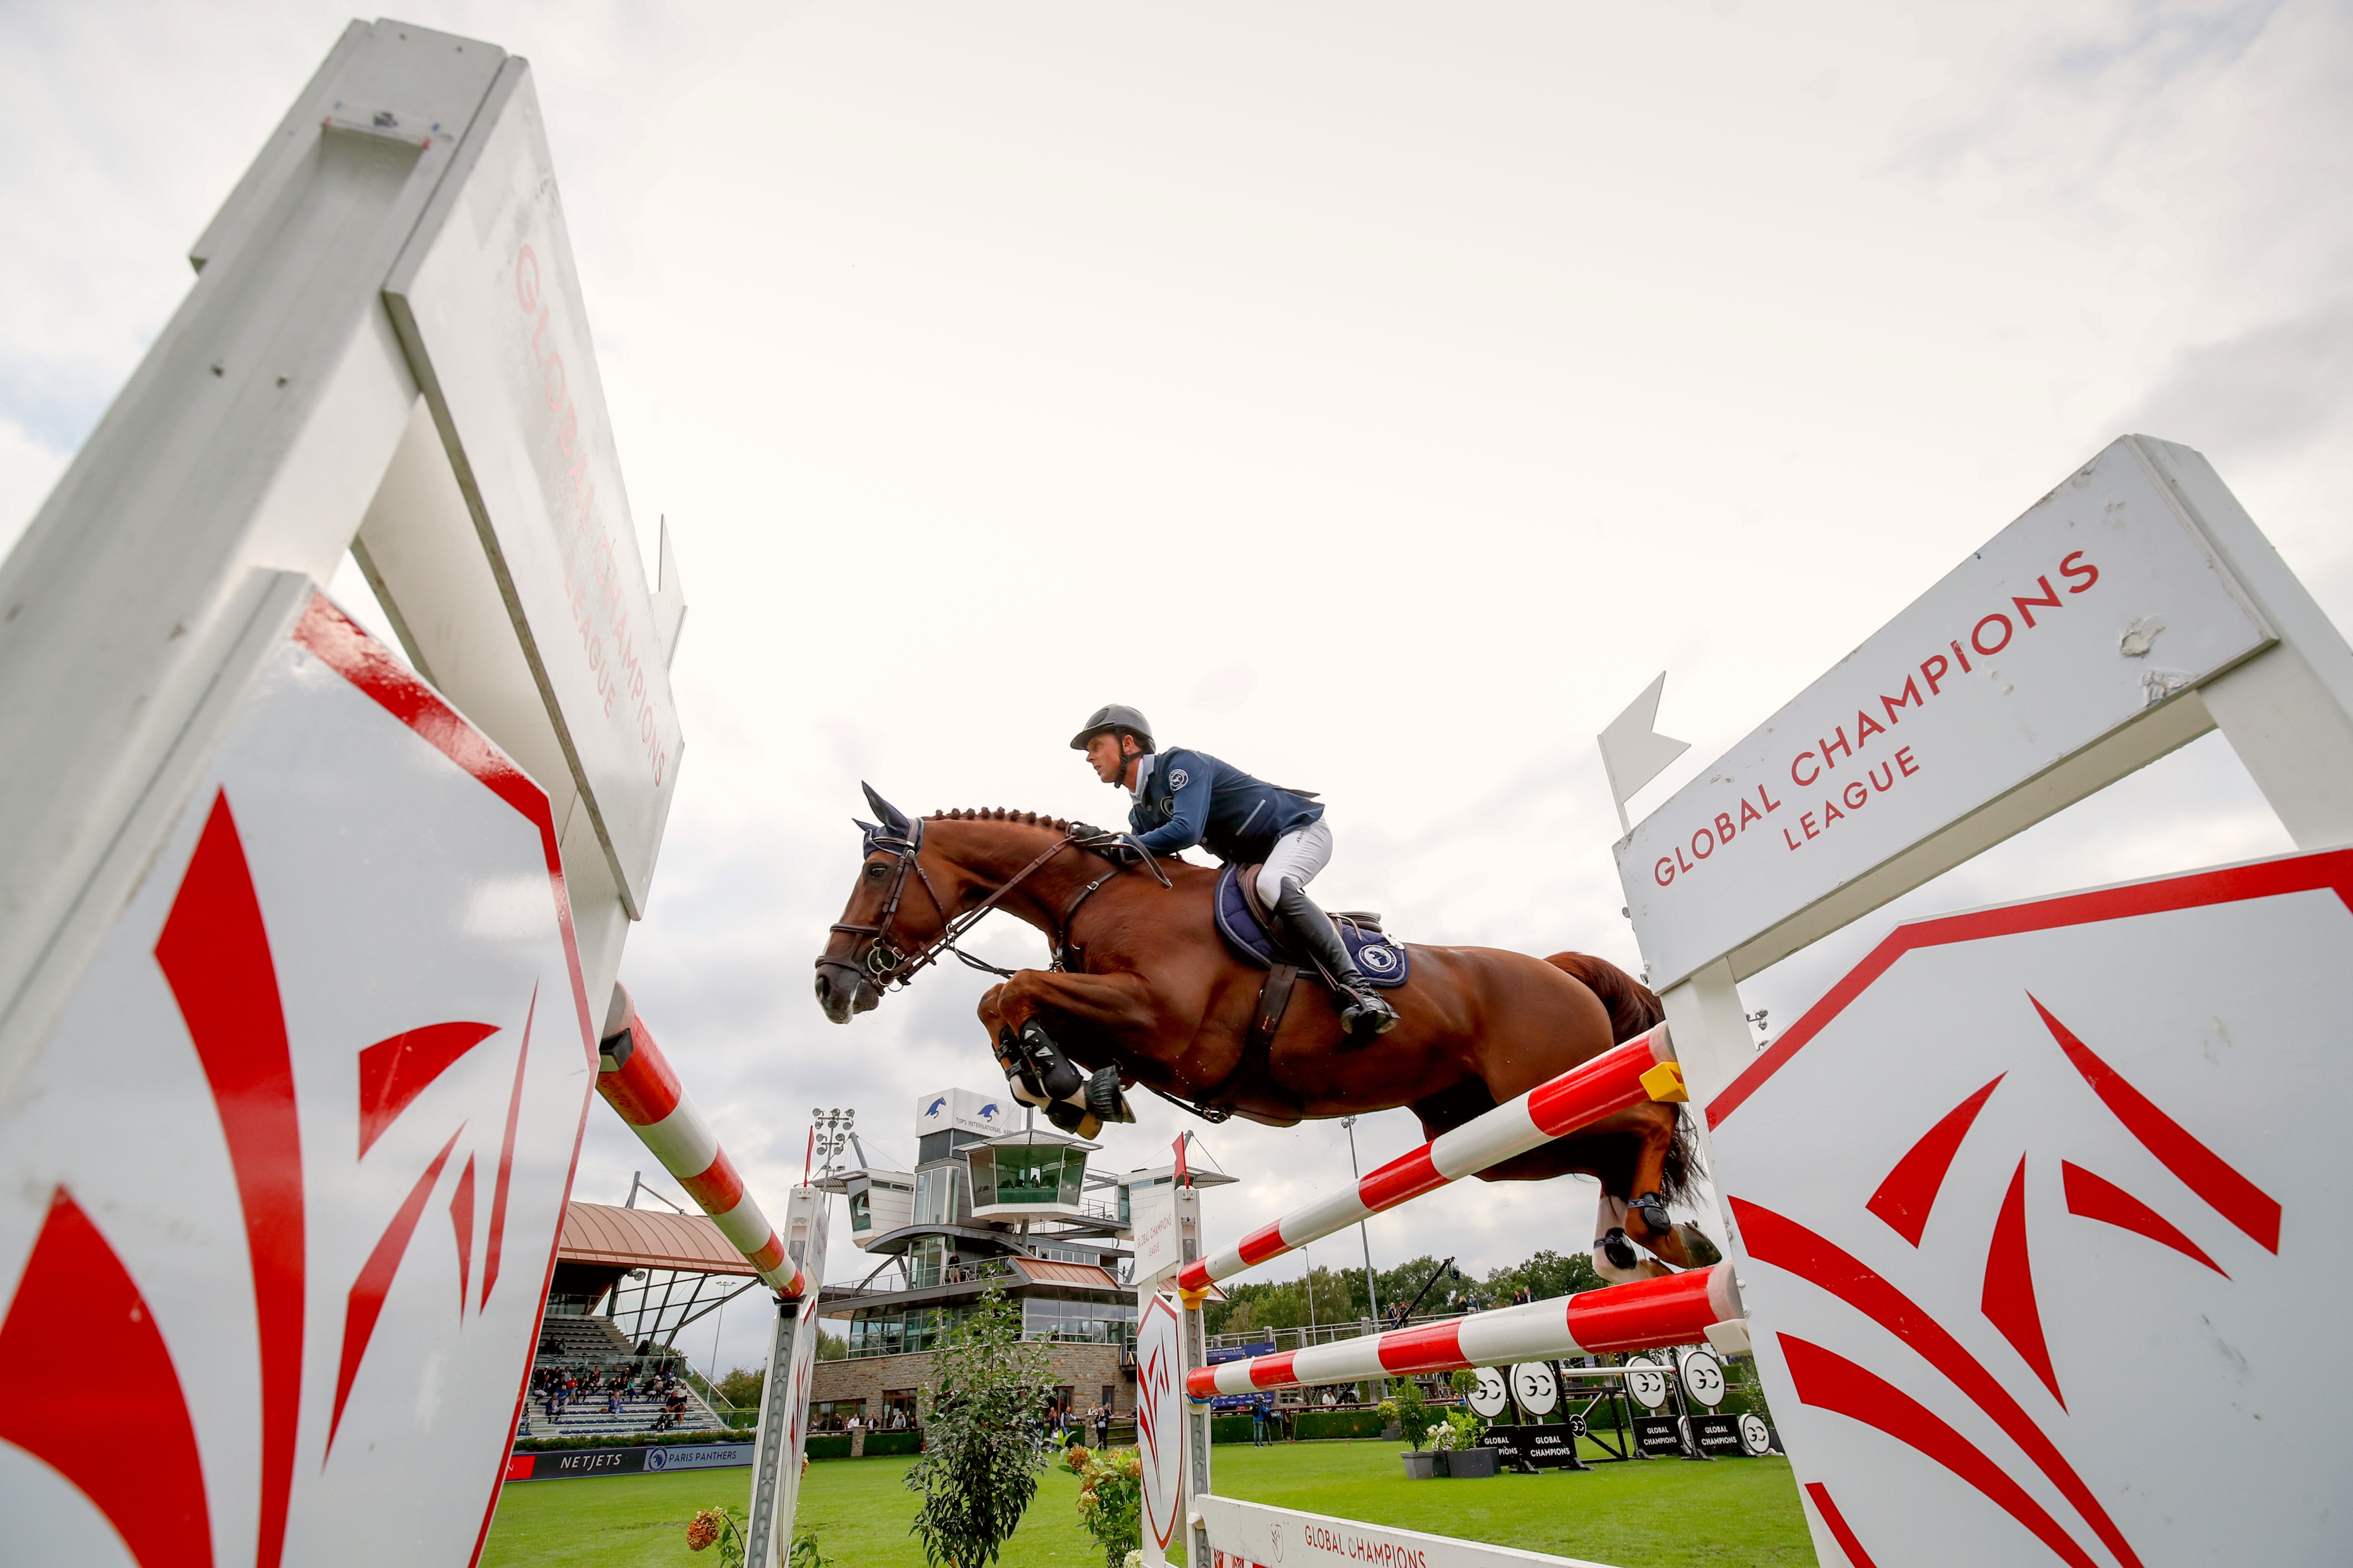 Andreas Schou takes the lead in GCL Valkenswaard